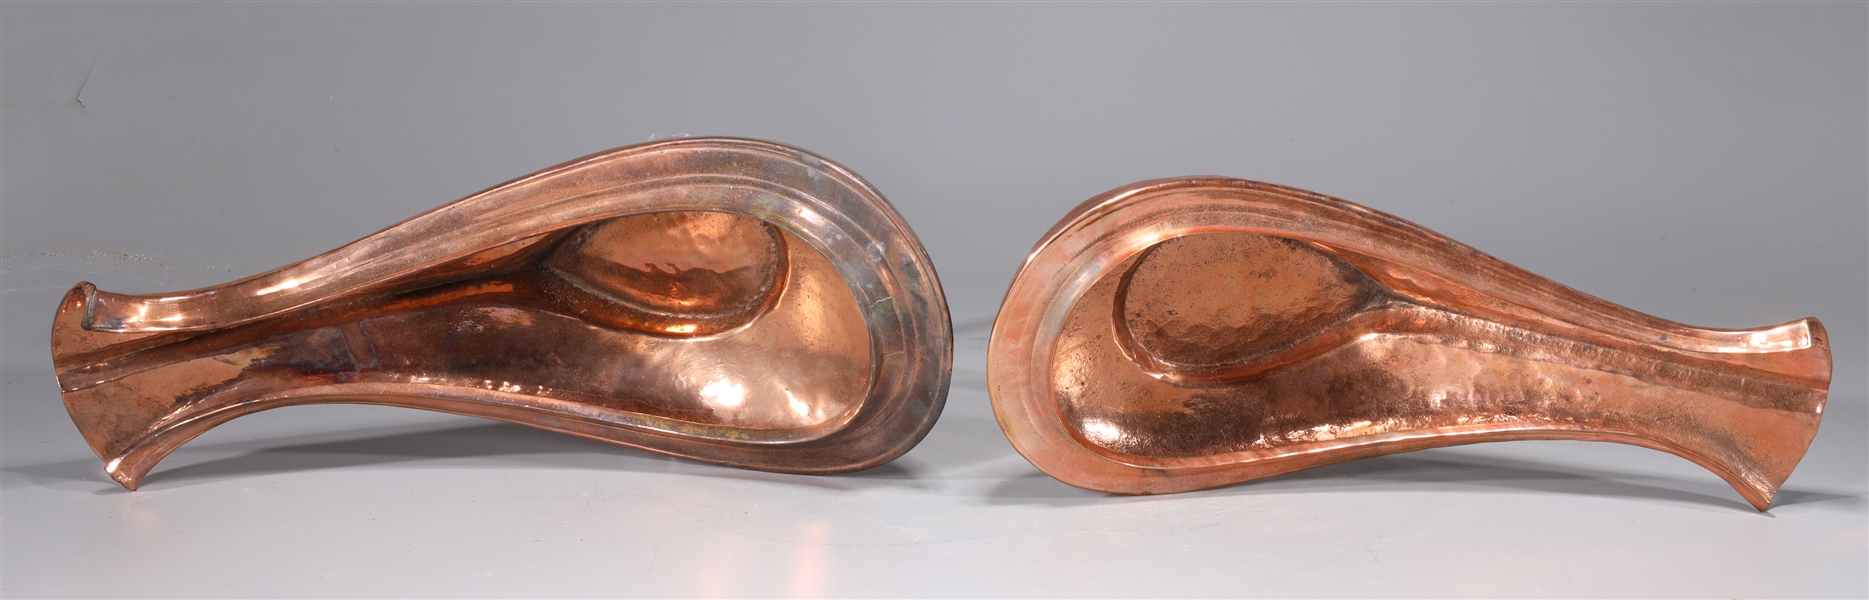 A pair of Yondi Hindi copper water